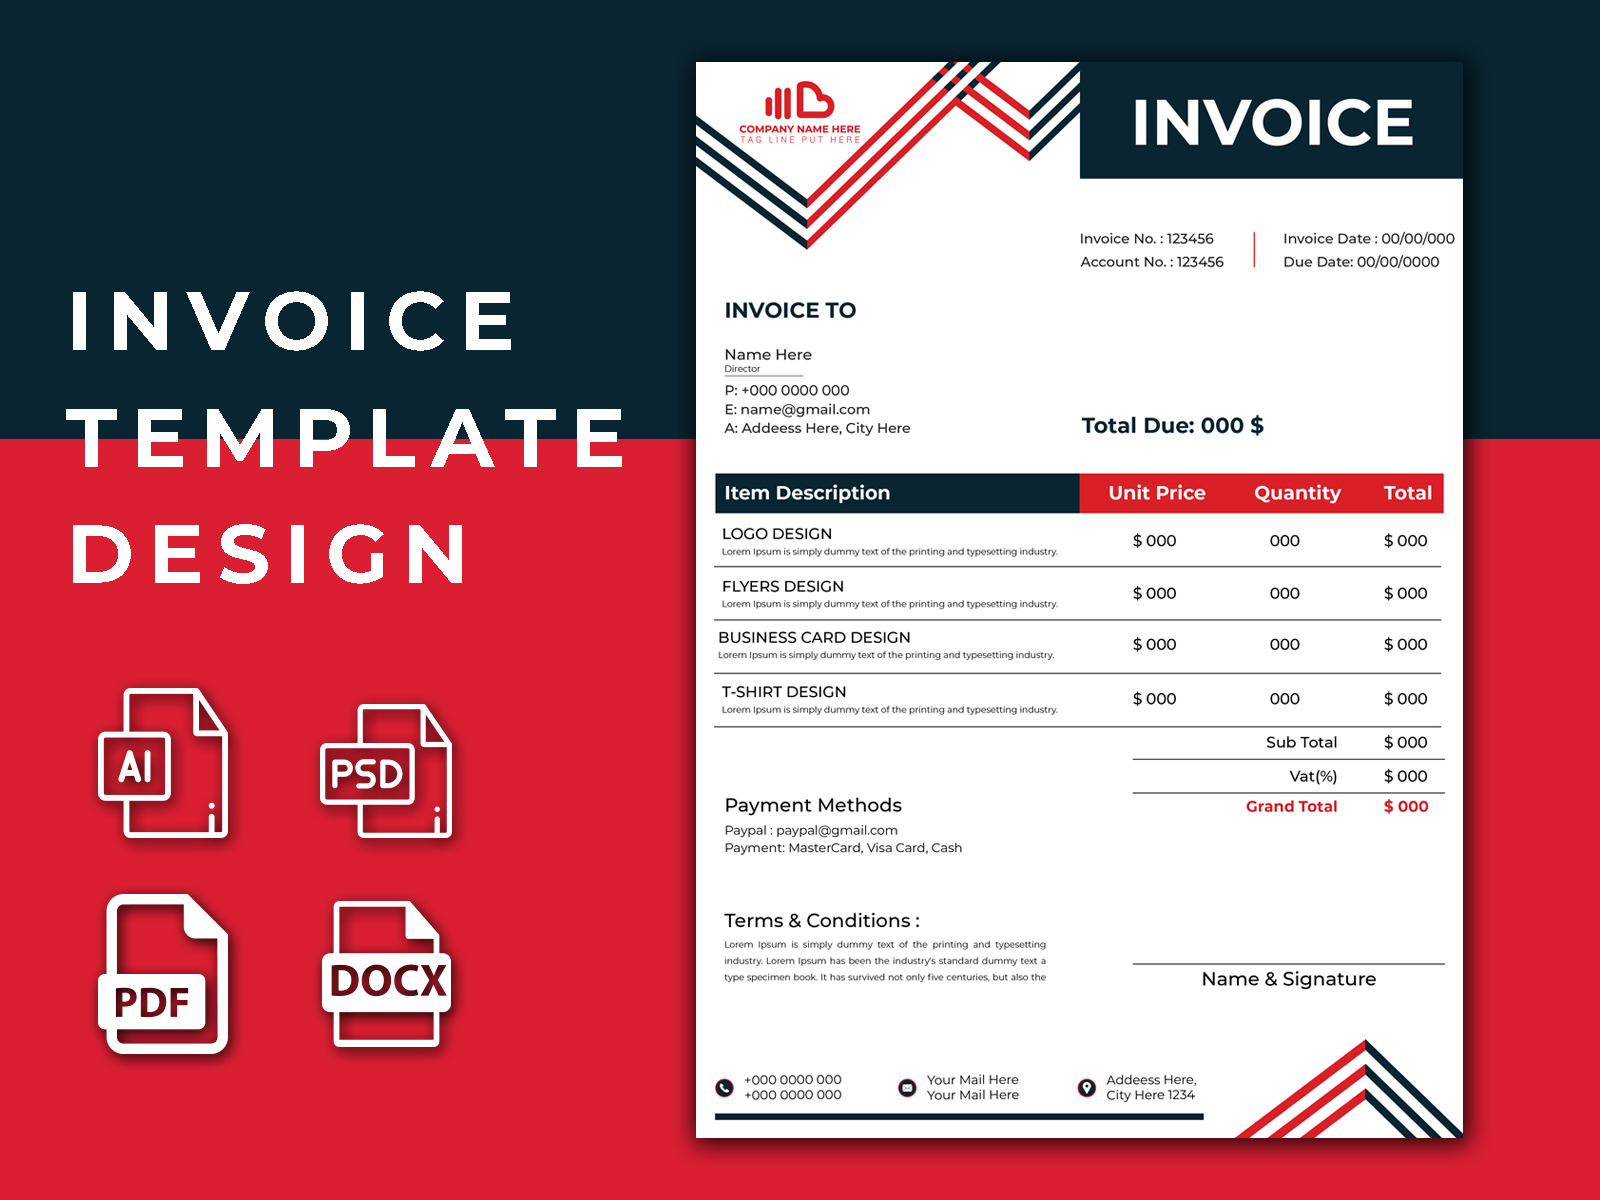 Creative Invoice Template Design by Rasel's Design on Dribbble